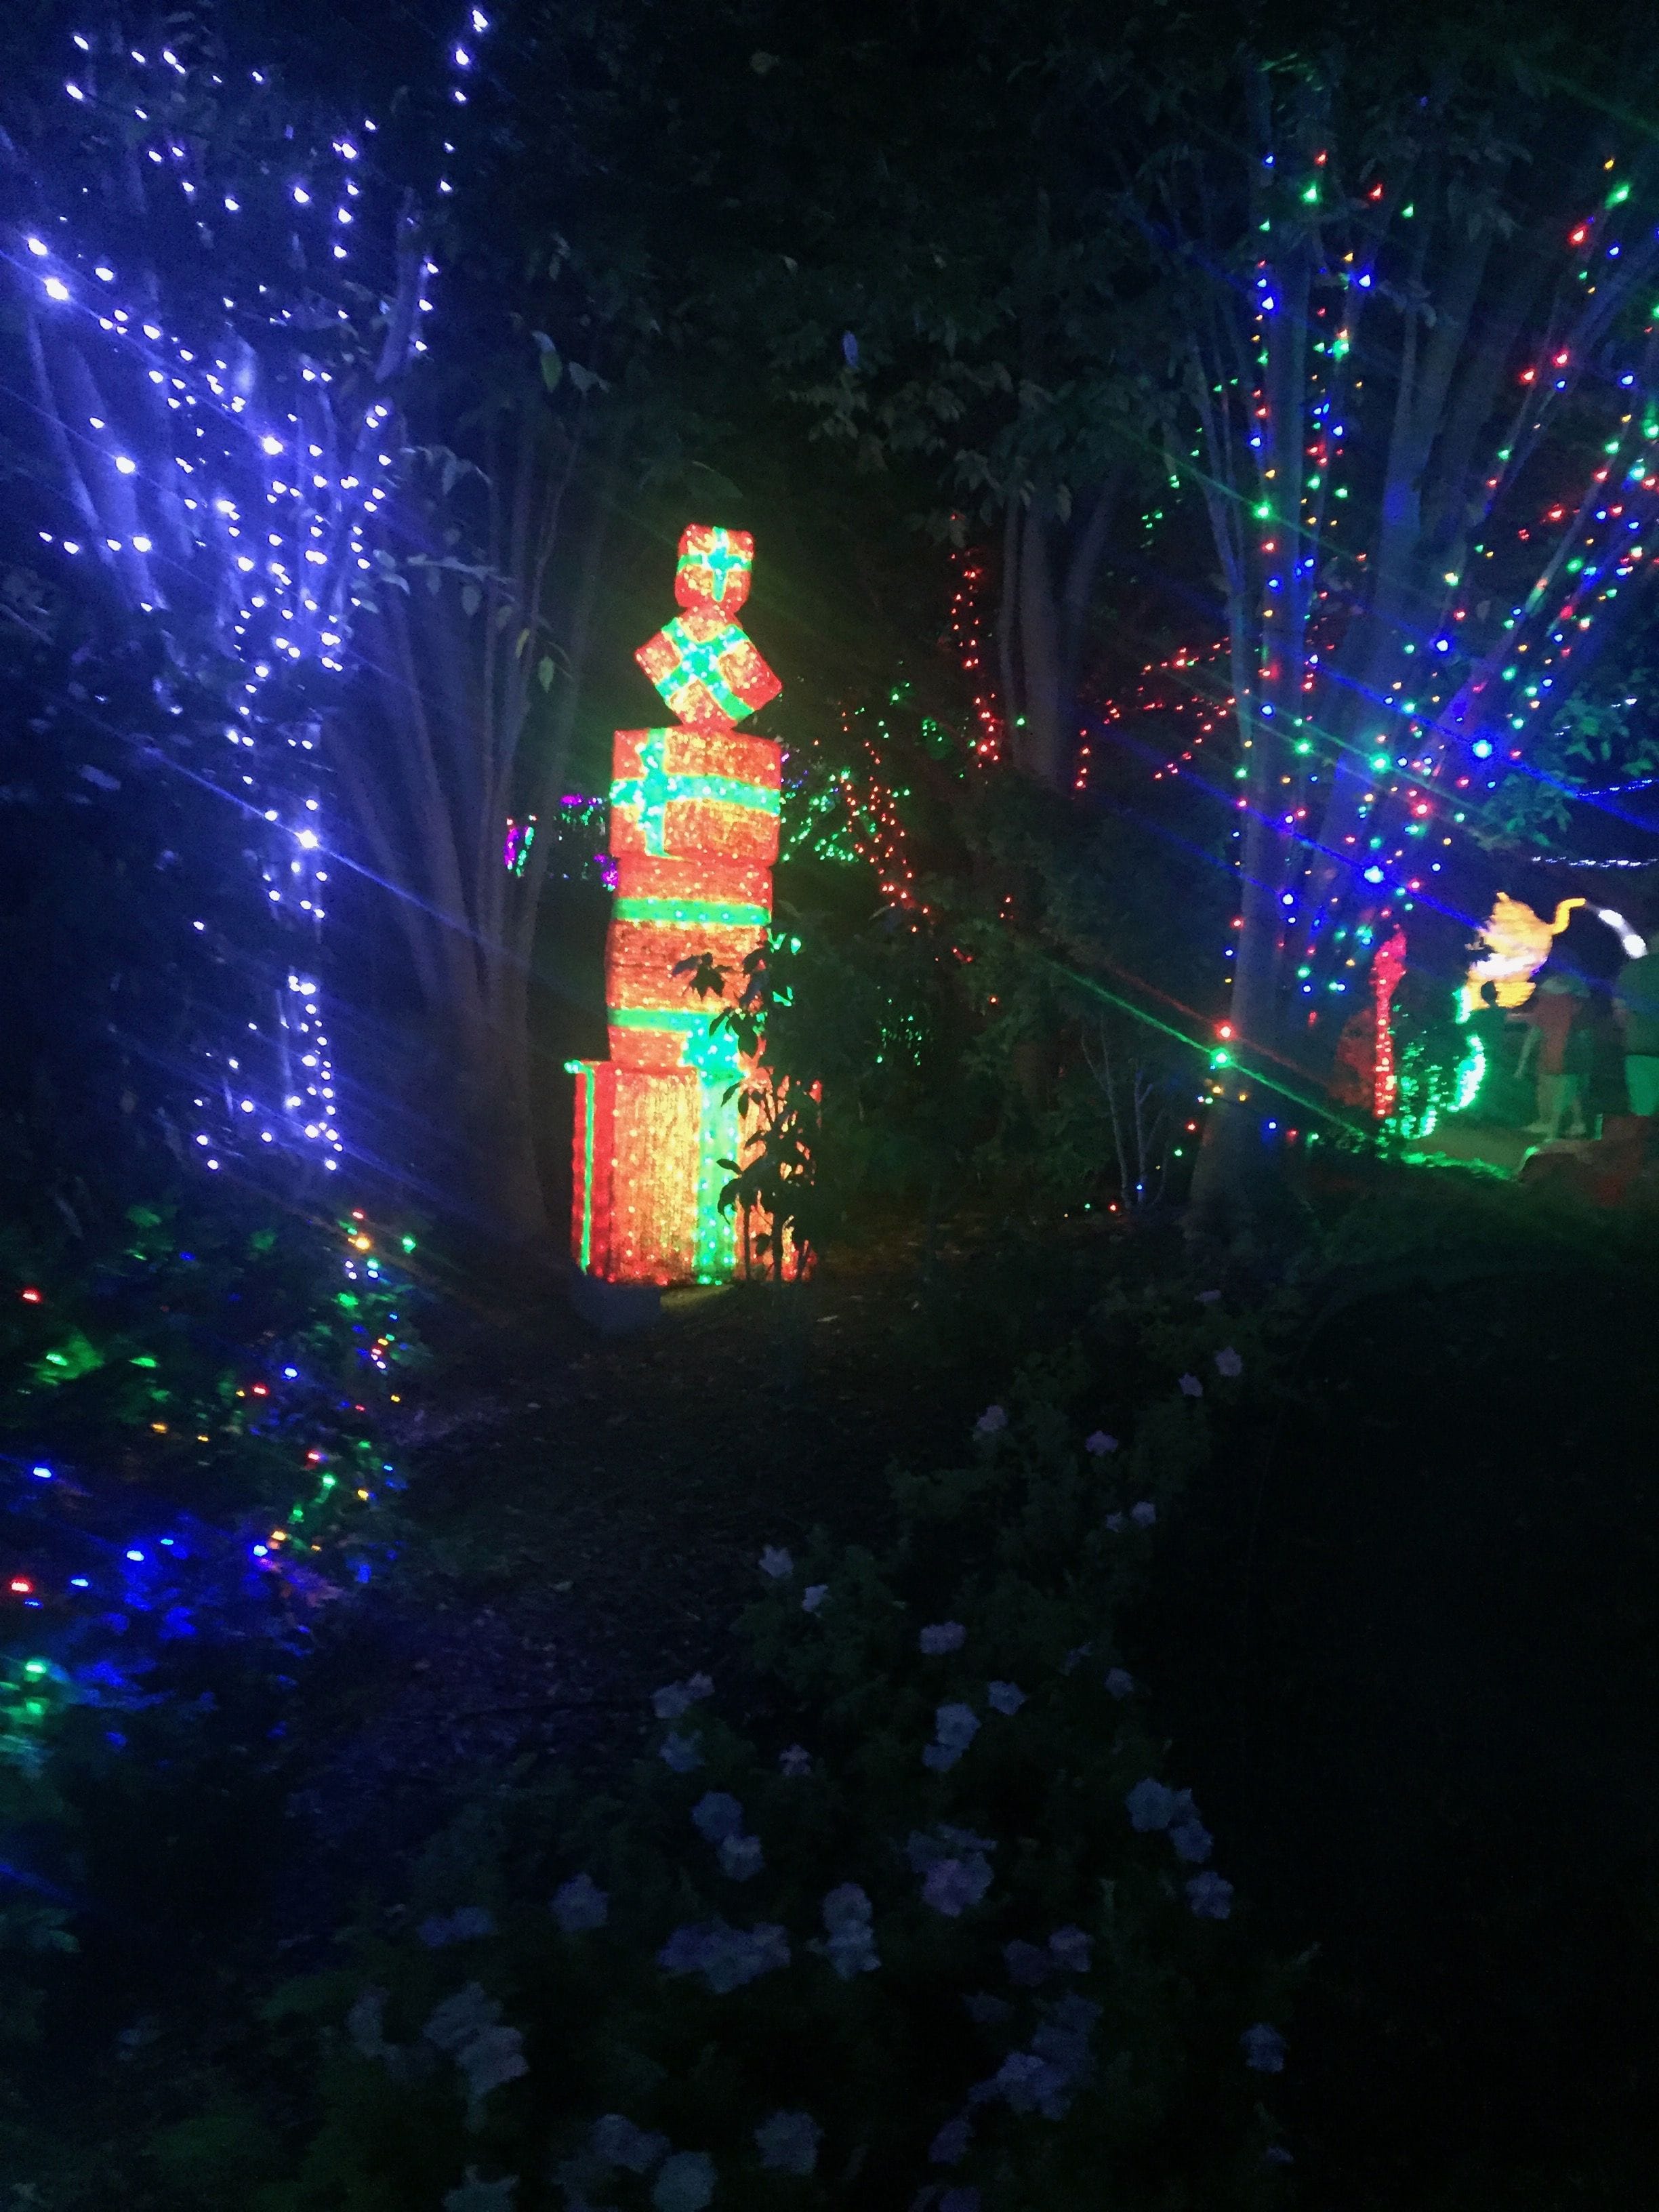 Hunter Valley Christmas Lights Spectacular Image -5b3abbc92894d